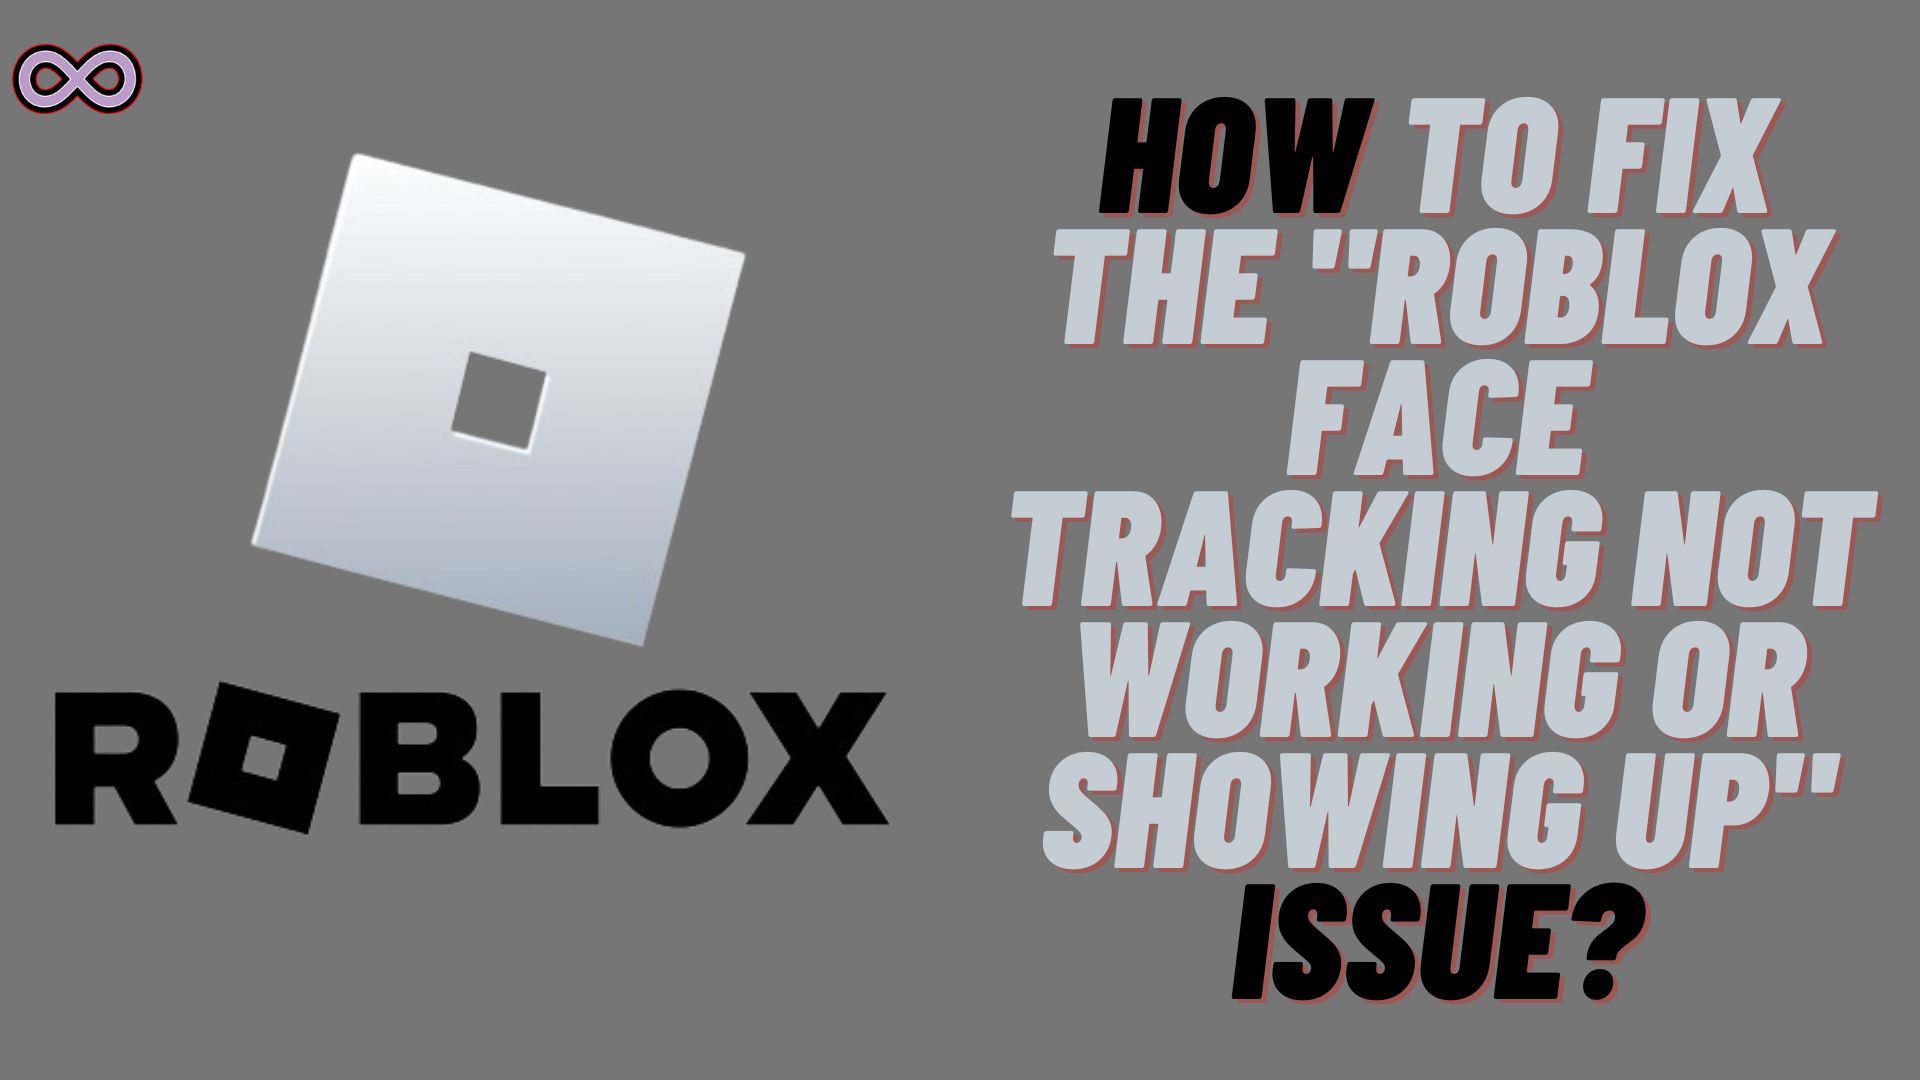 Roblox Face Tracking Not Working Or Showing FIXED